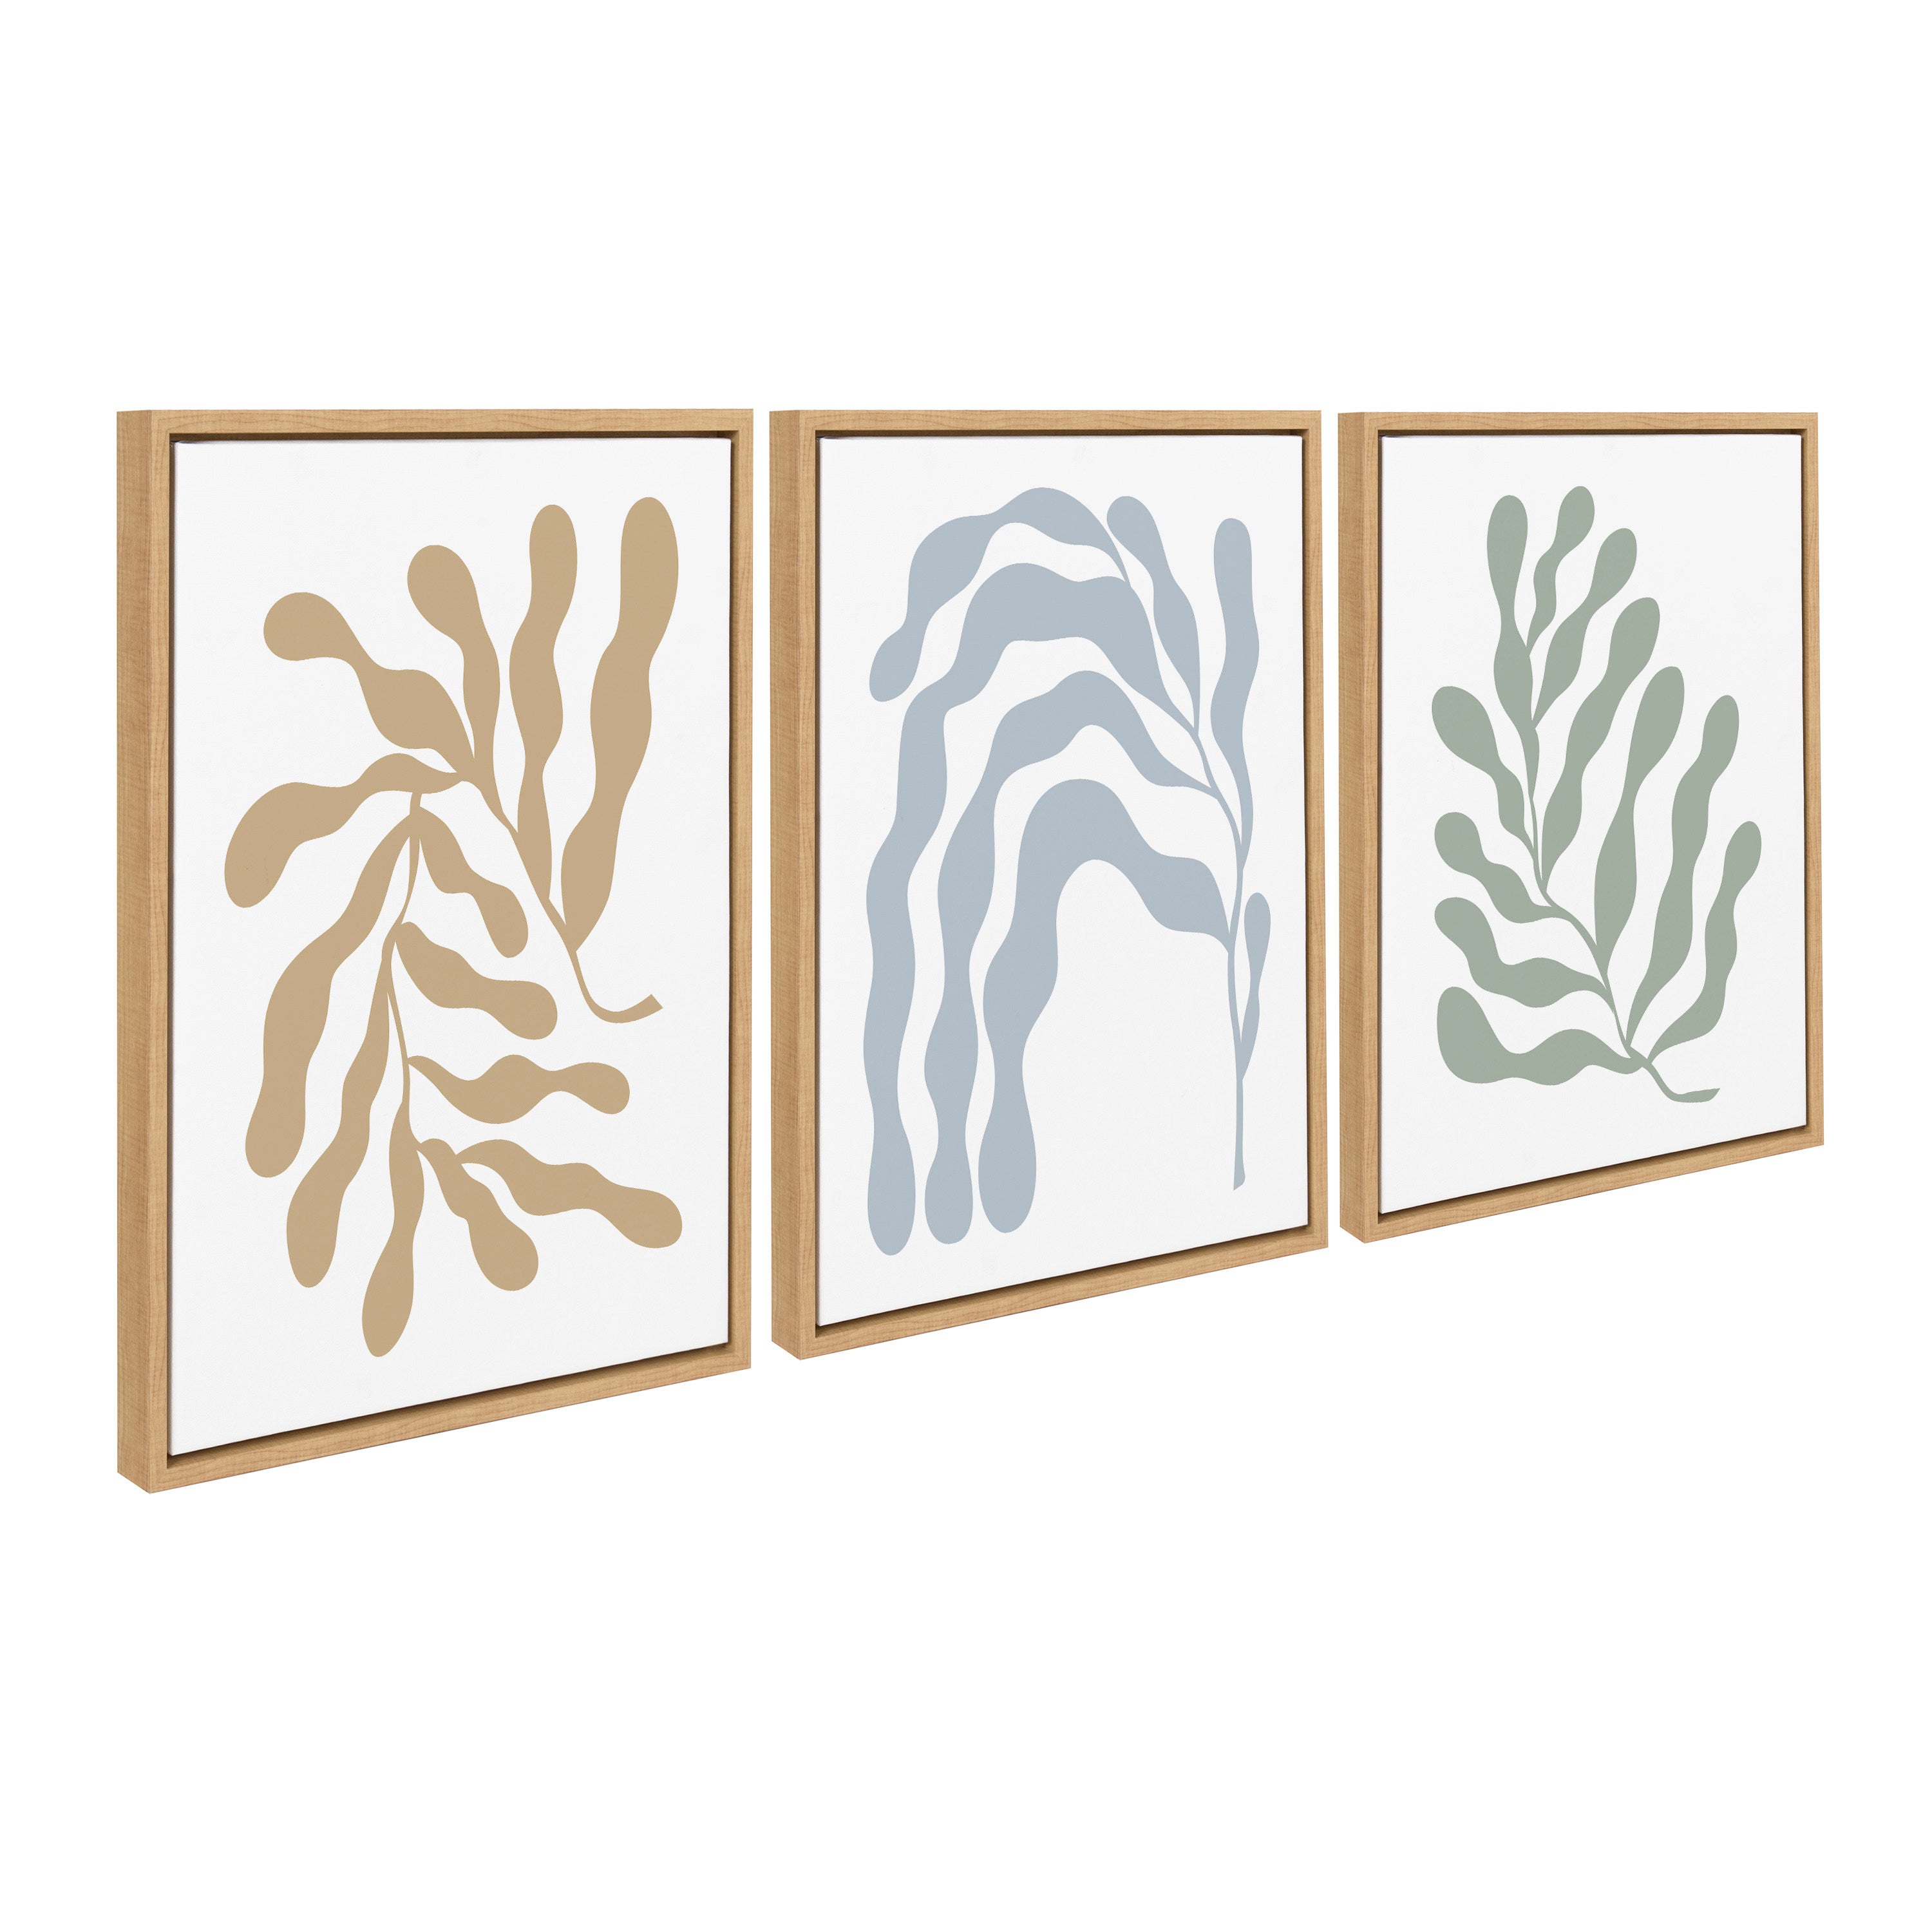 Sylvie Matisse Inspired Abstract Botanicals Framed Canvas by The Creative Bunch Studio